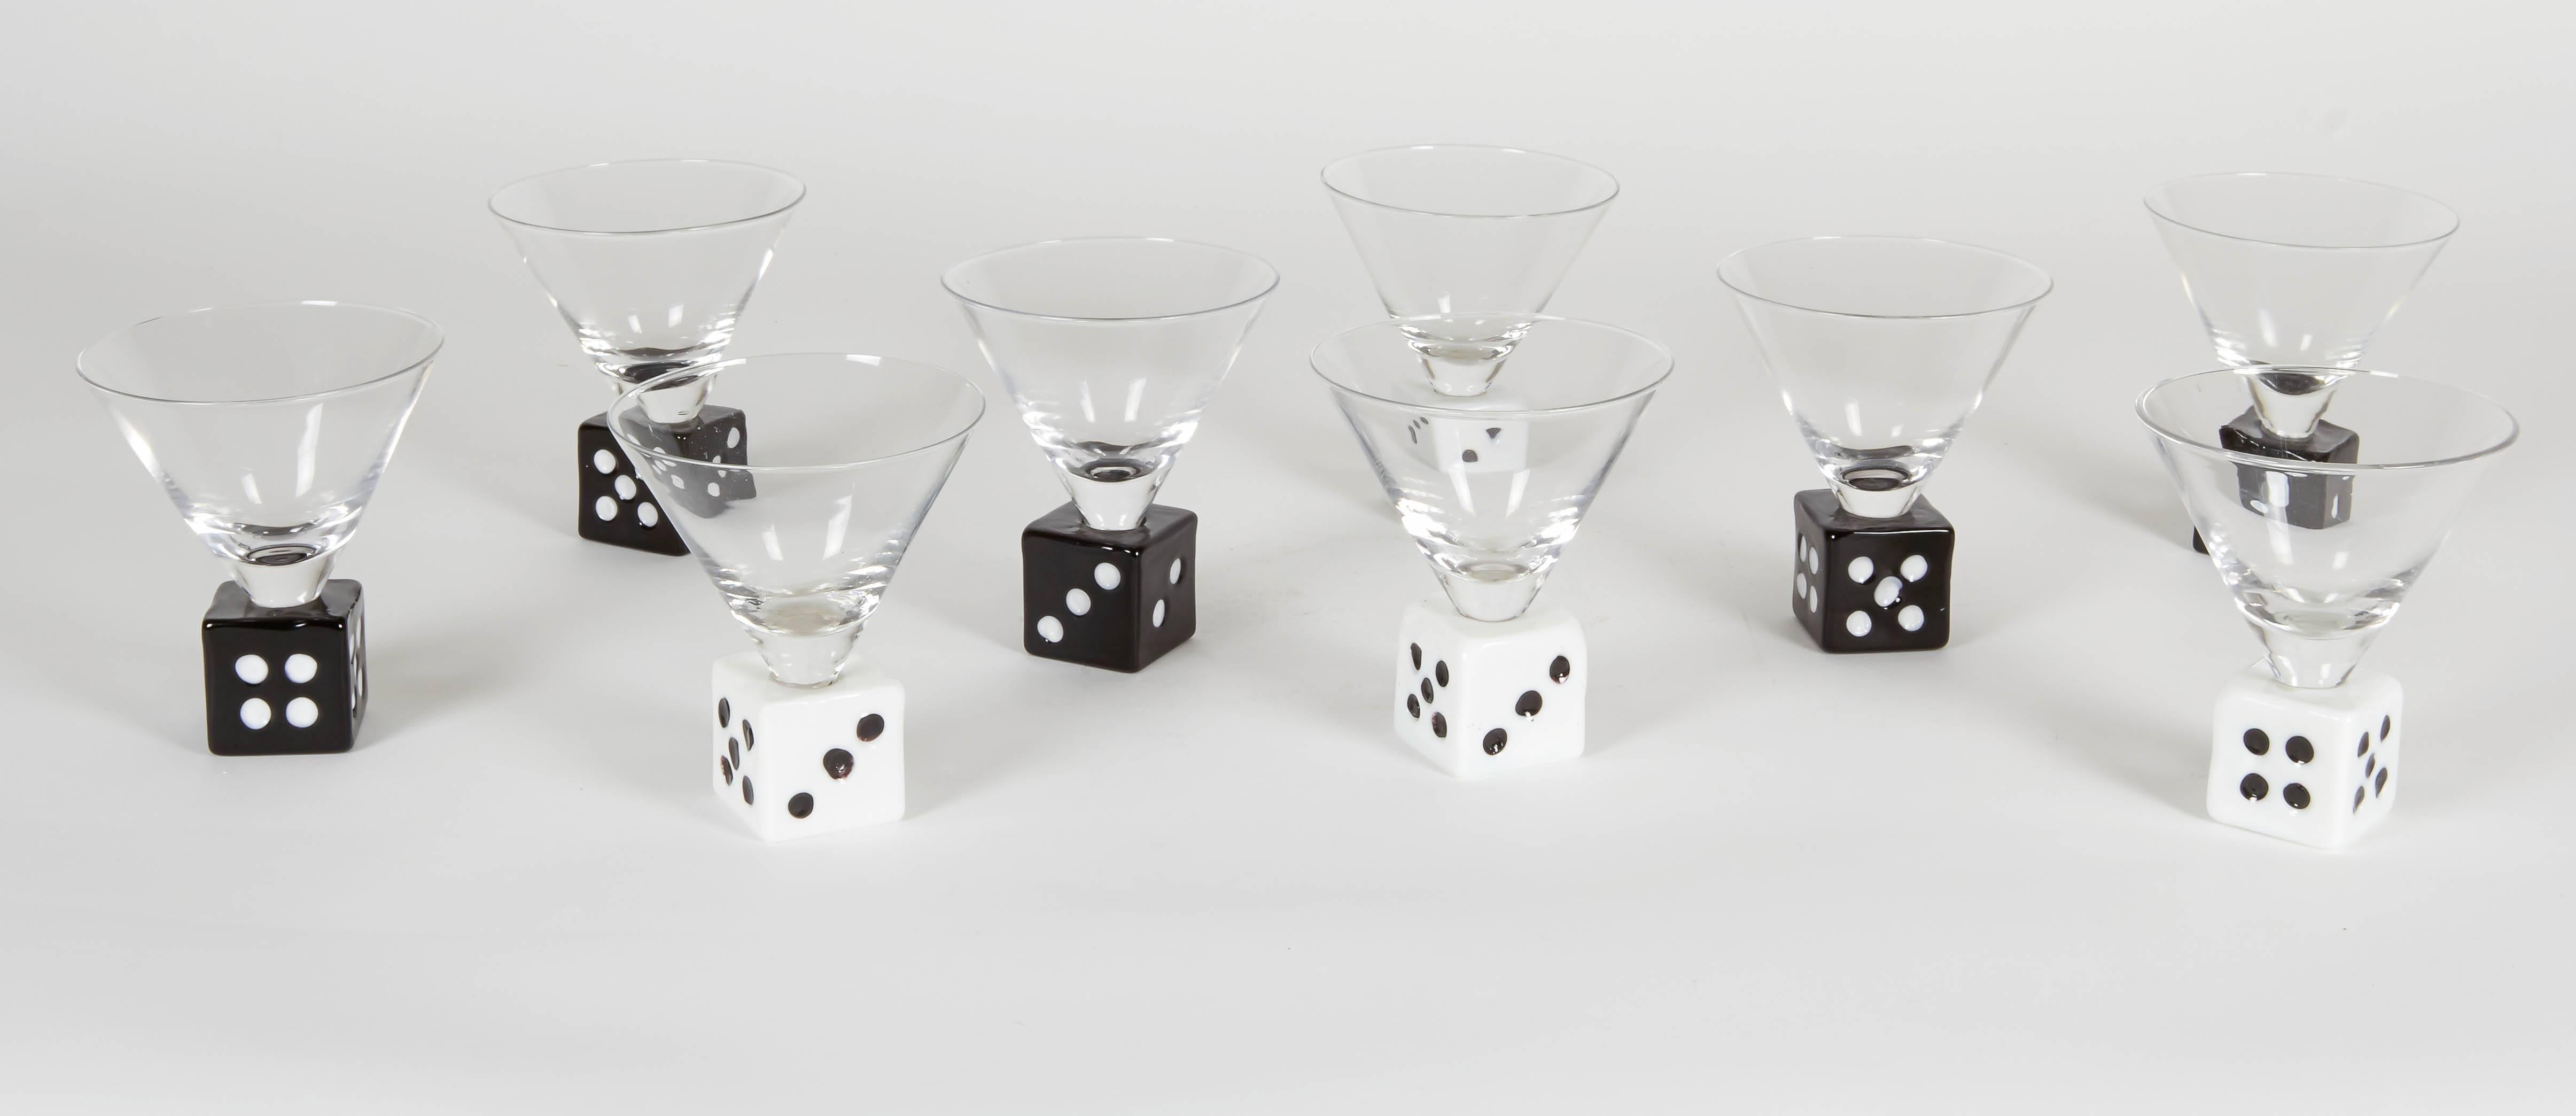 Set of nine vintage martini glasses with a dice base. The set includes four white and five black glasses. A must for entertaining on game night.